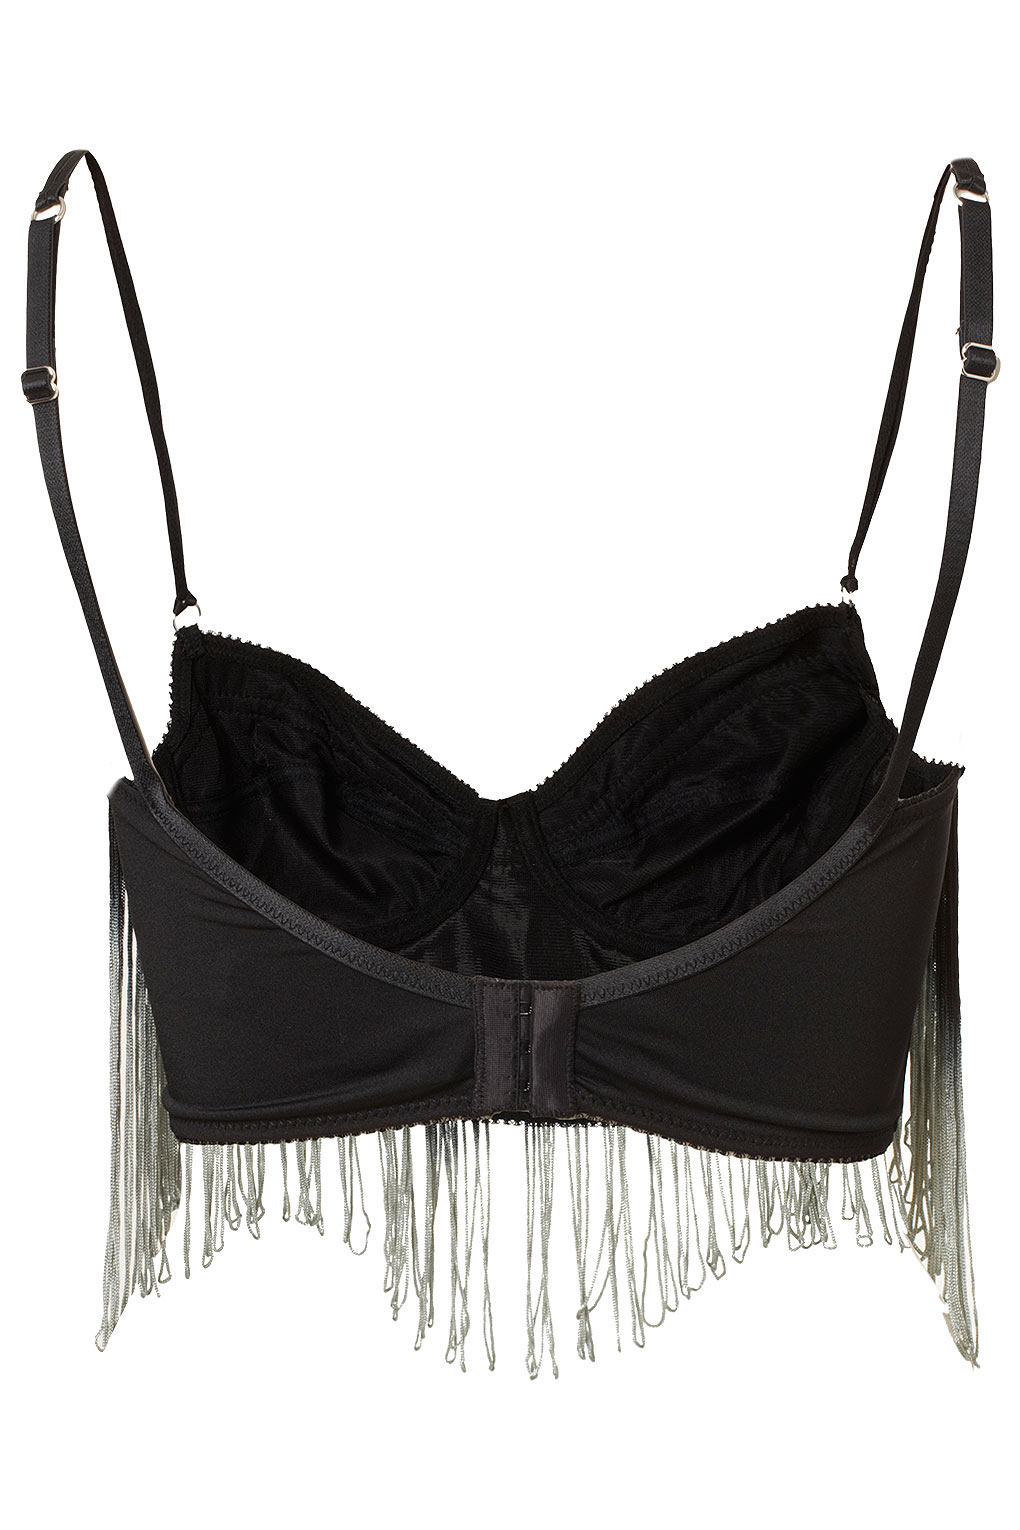 Lyst - Topshop Mesh And Lace Body in Black